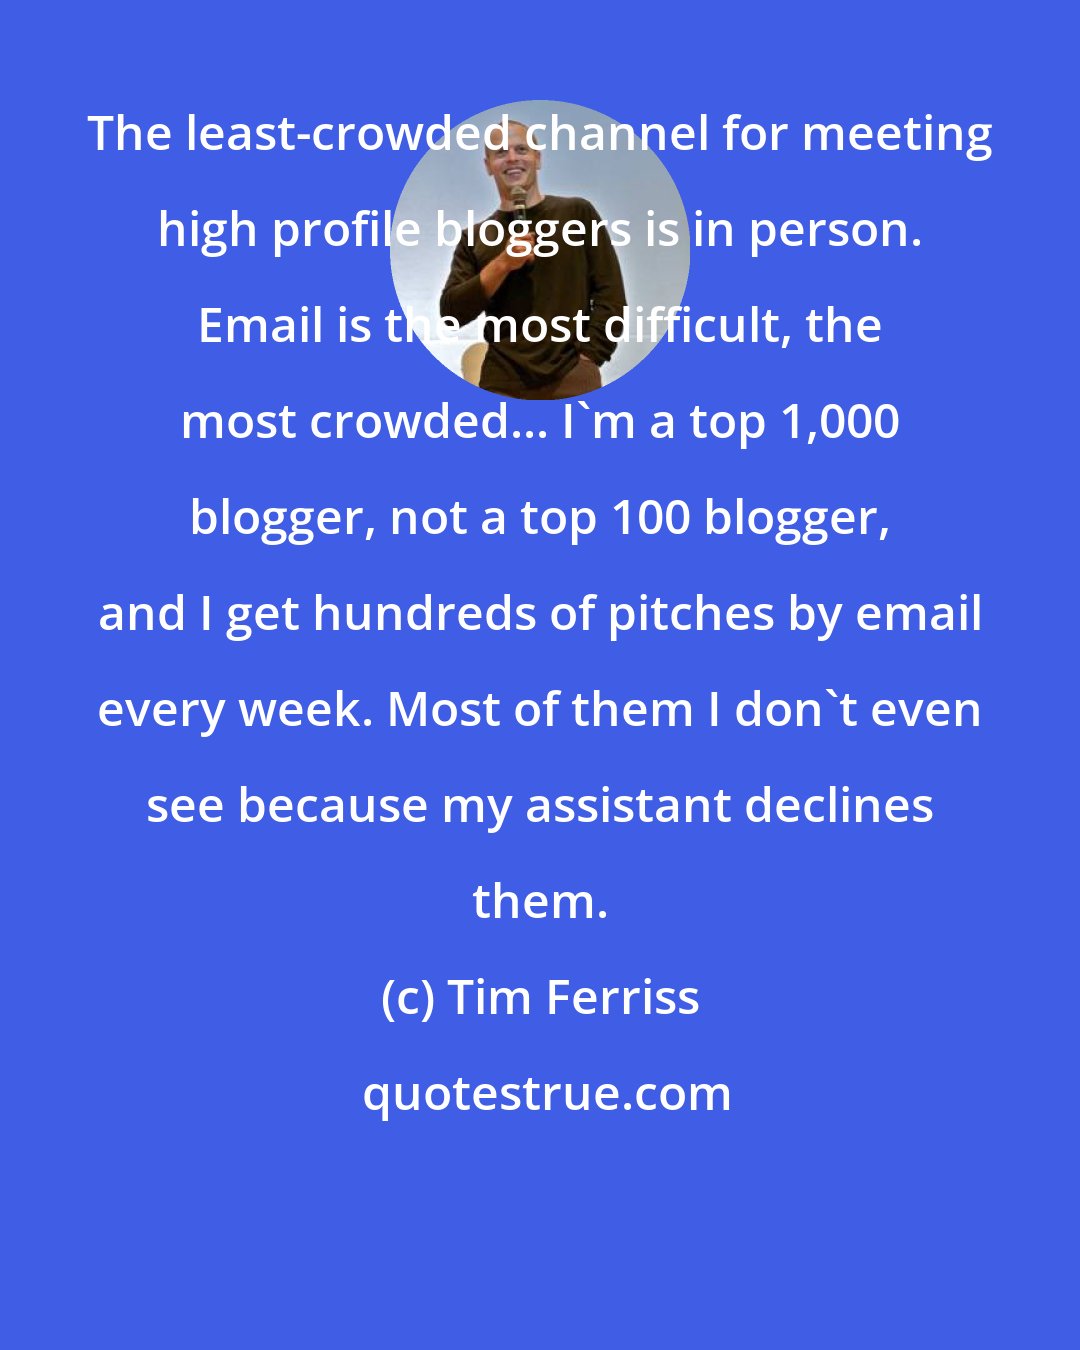 Tim Ferriss: The least-crowded channel for meeting high profile bloggers is in person. Email is the most difficult, the most crowded... I'm a top 1,000 blogger, not a top 100 blogger, and I get hundreds of pitches by email every week. Most of them I don't even see because my assistant declines them.